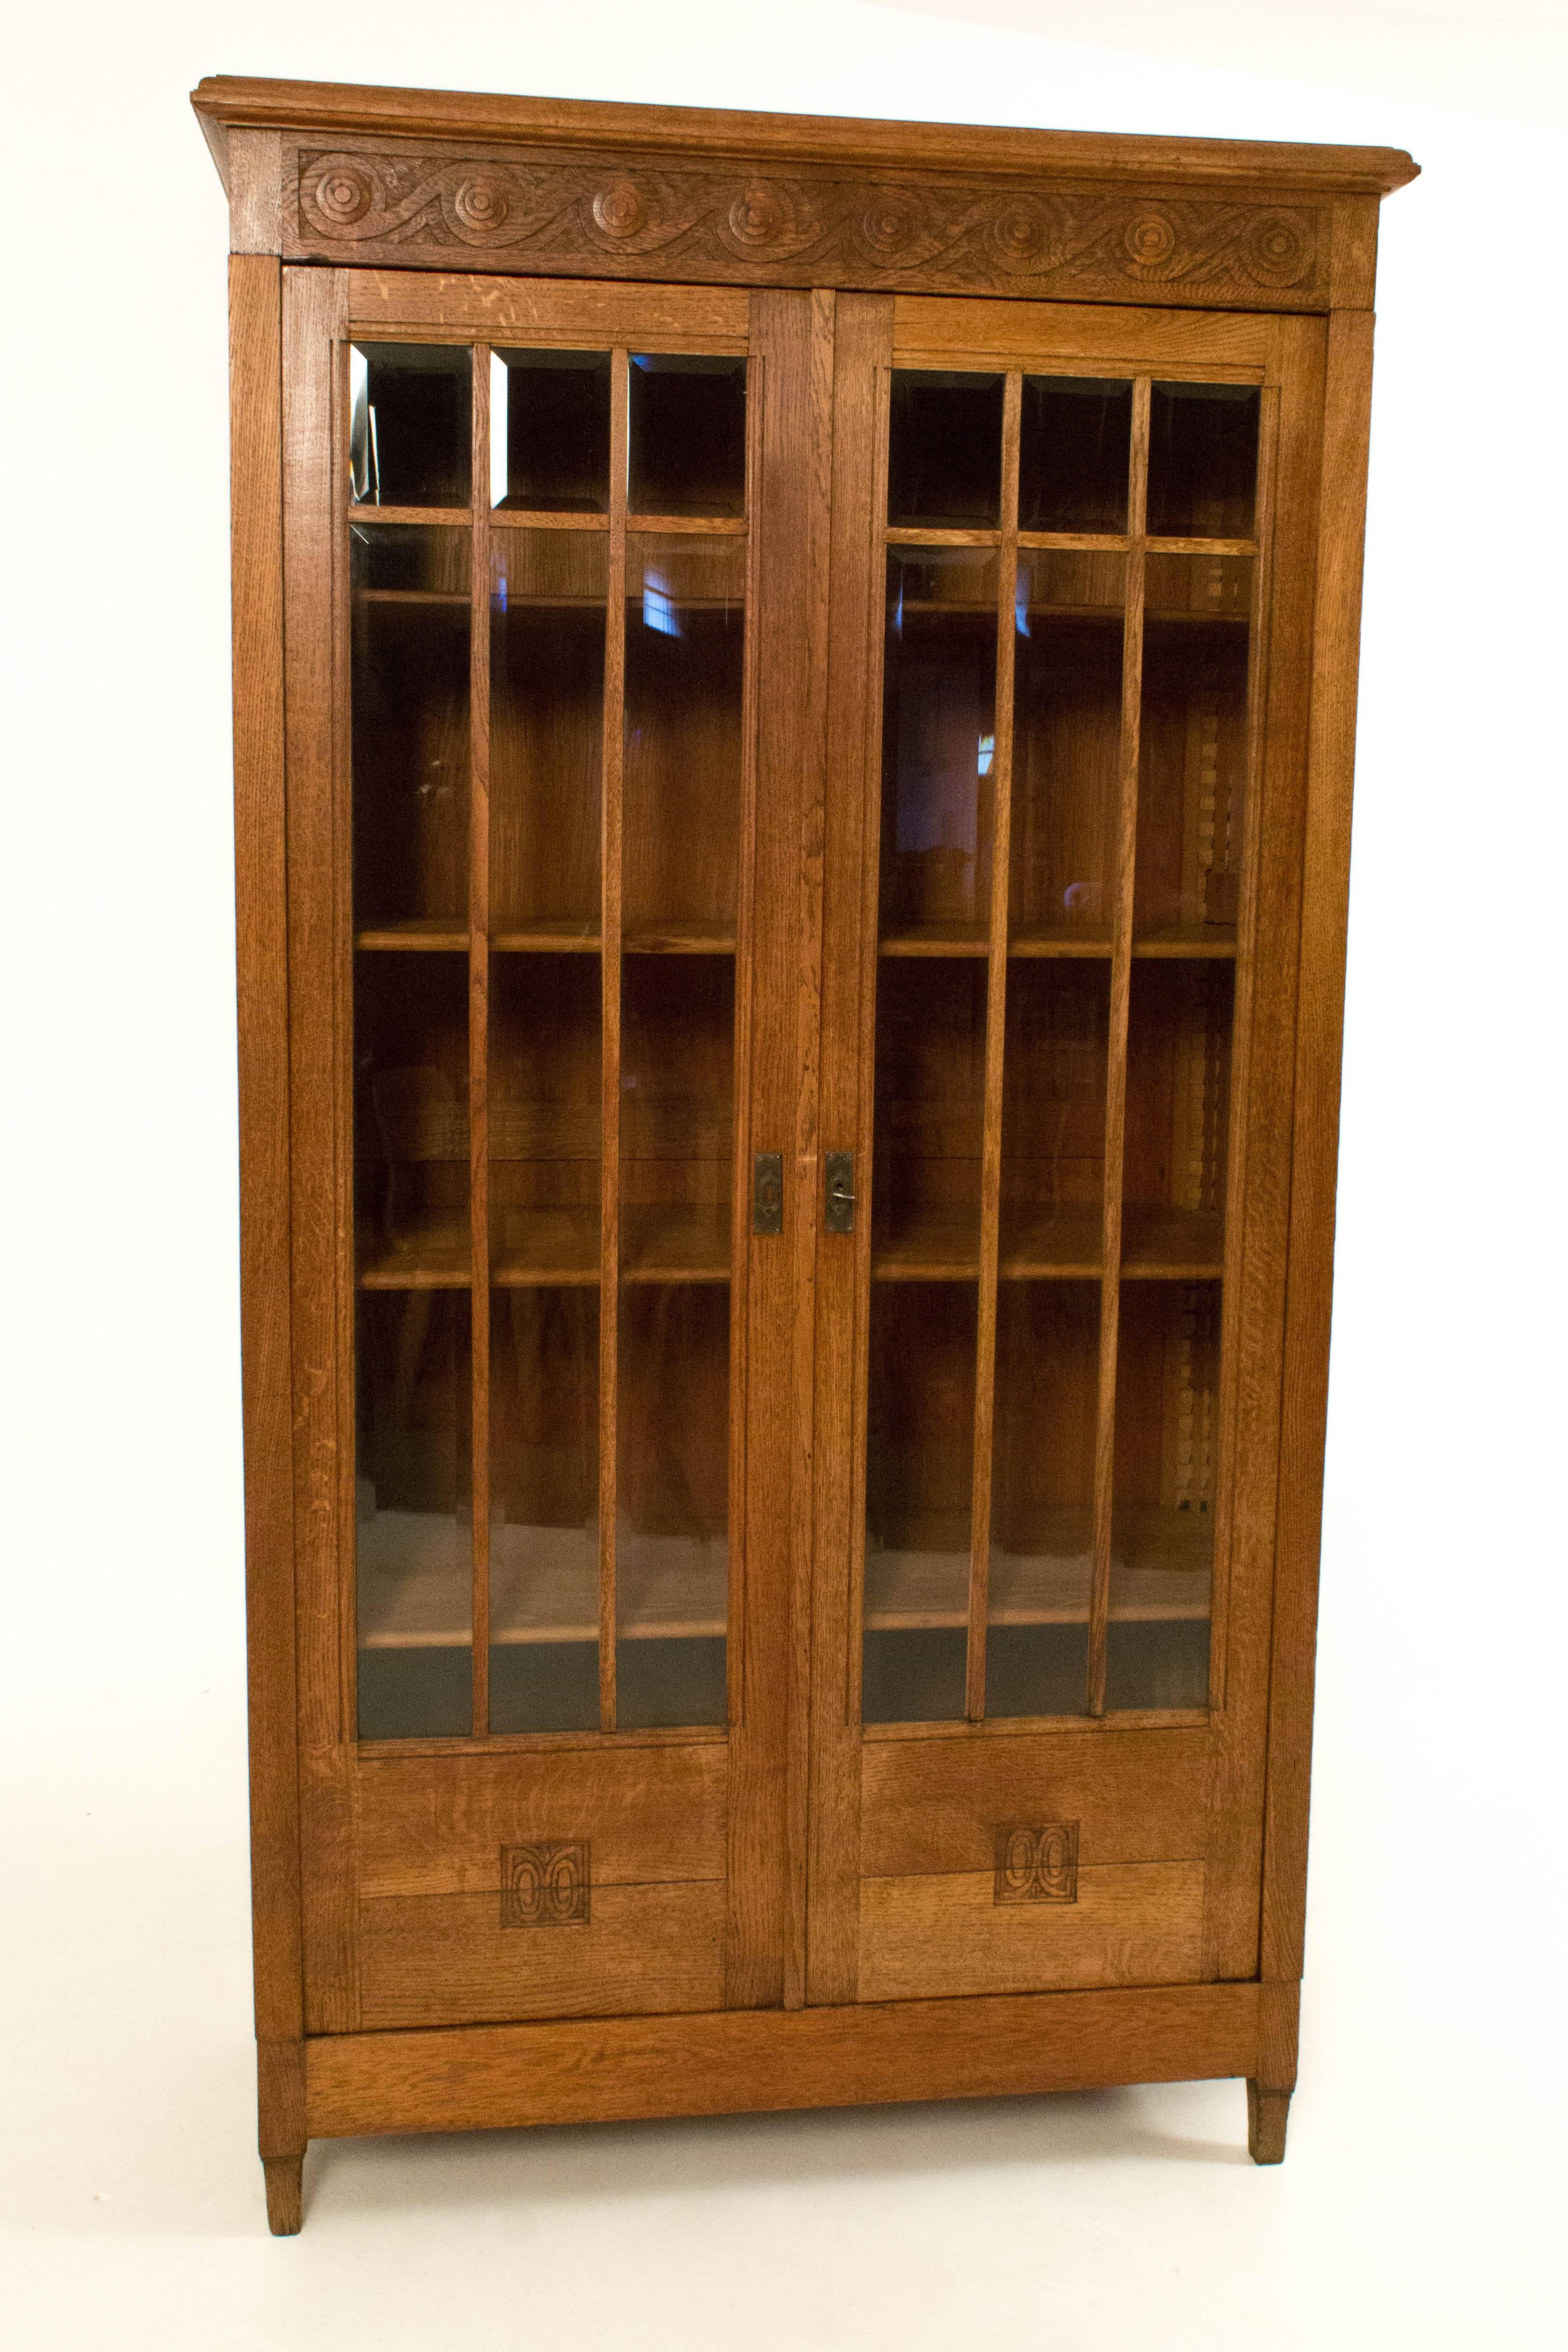 Stunning French Art Nouveau bookcase, 1900s.
With original beveled glass.
Bookcase can be taken apart into eleven pieces.
In good original condition with minor wear consistent with age and use,
preserving a beautiful patina.